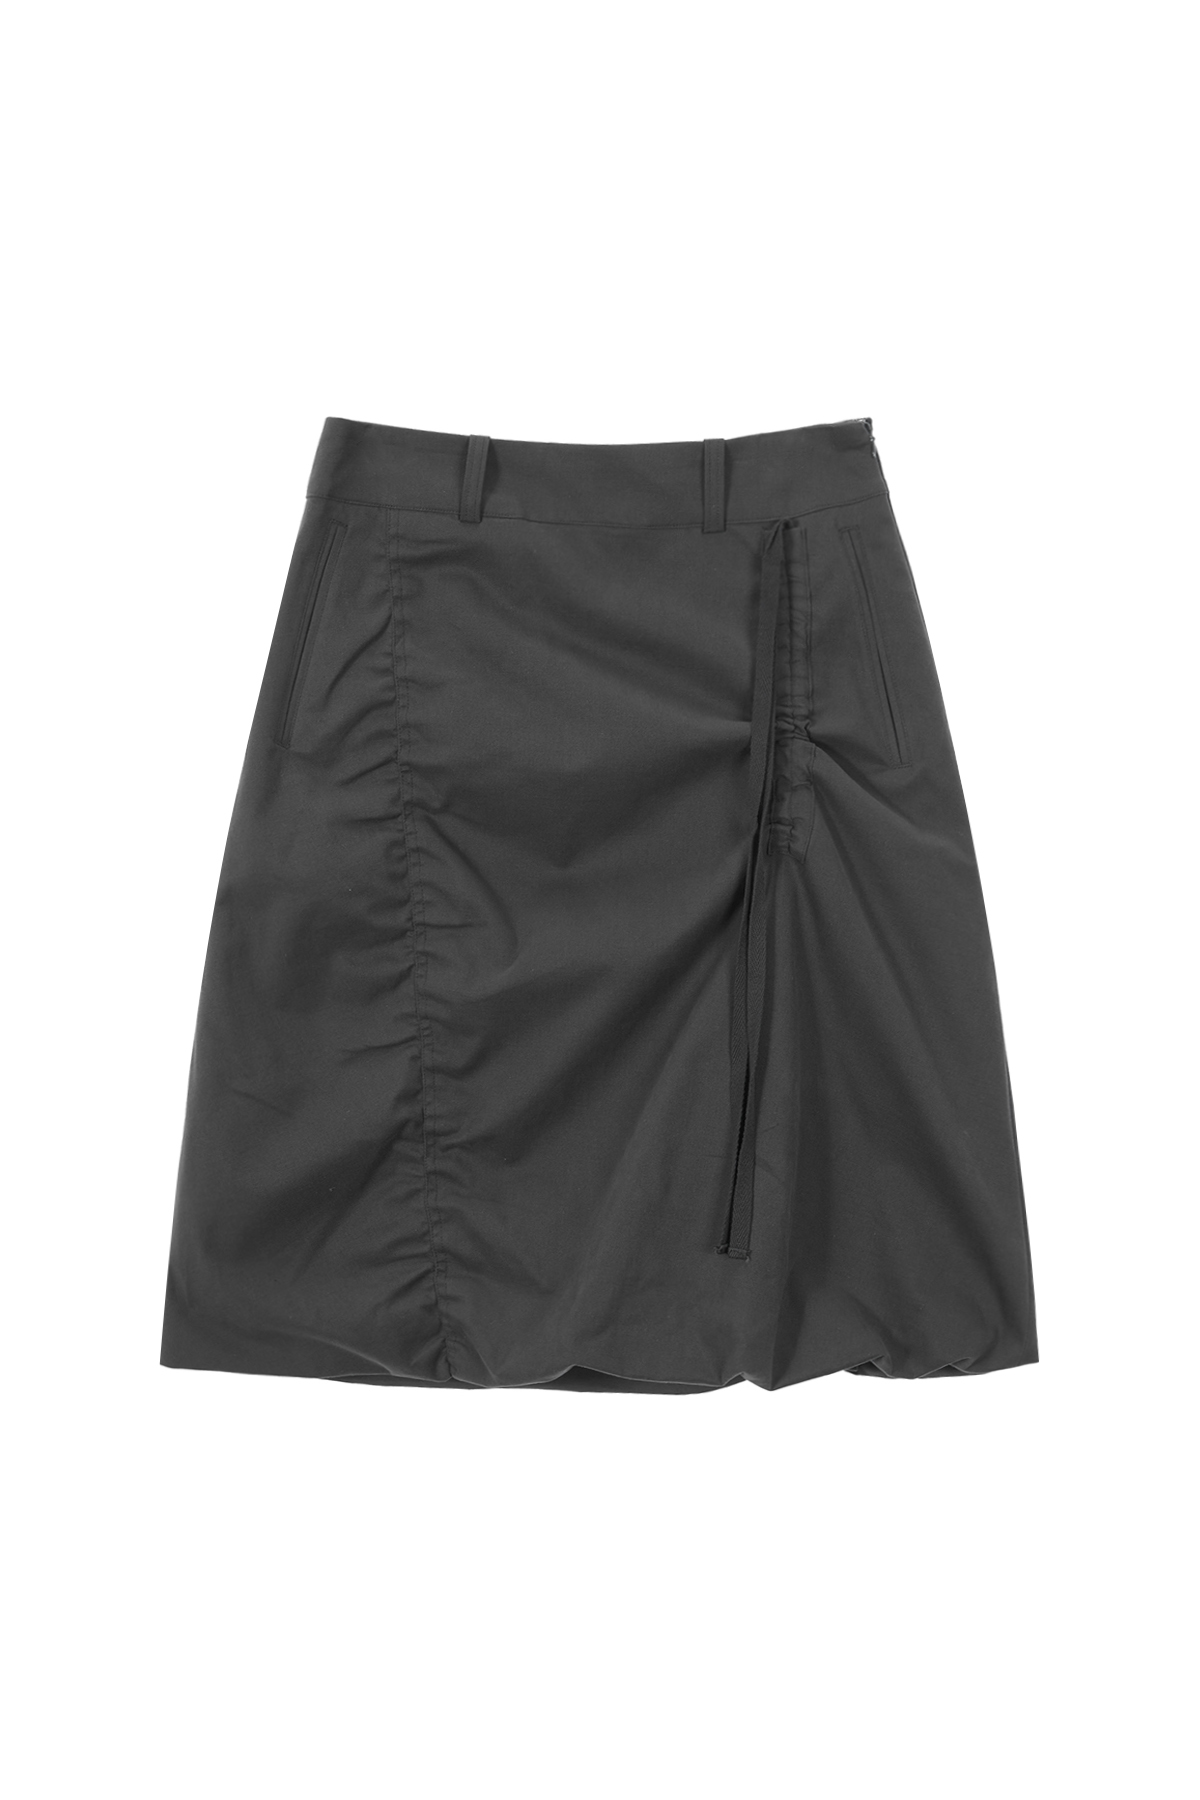 SHIRRING POINT PUFF SKIRT IN CHARCOAL